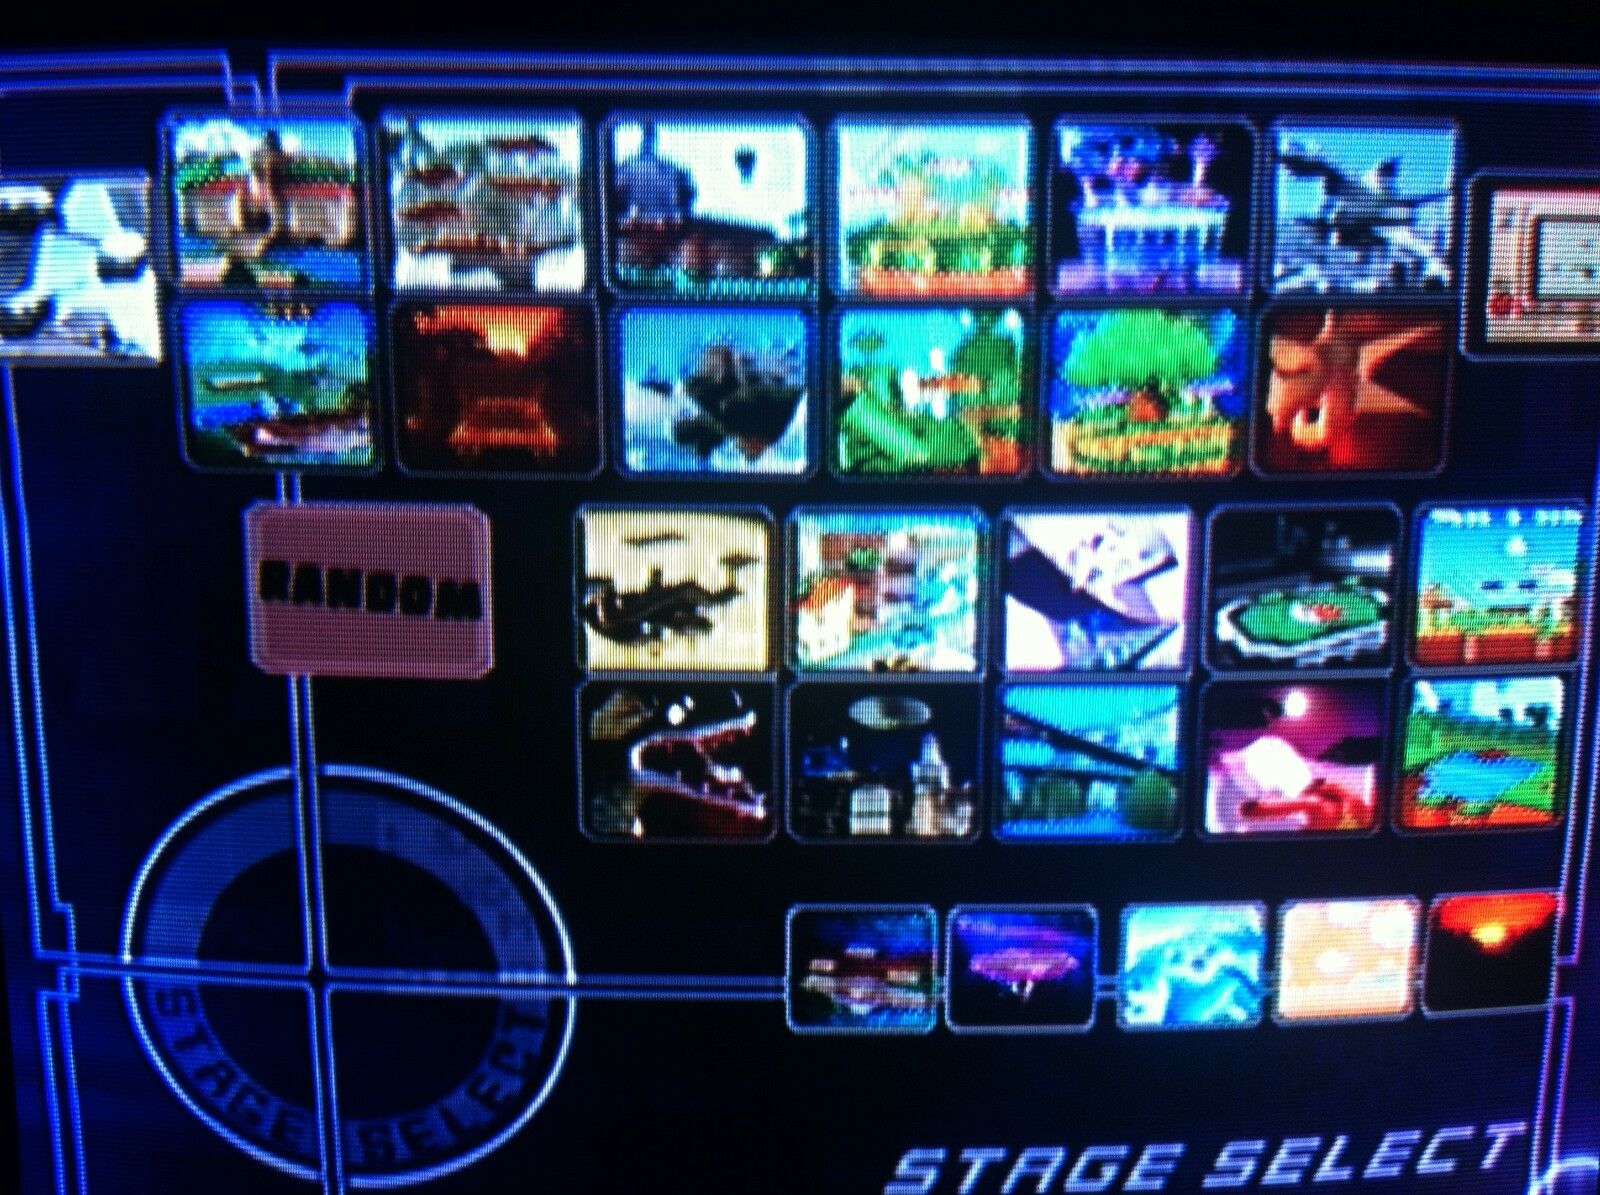 Gamecube Memory Card With 37 Save Files Unlocked Smash Melee Party Mario Kart